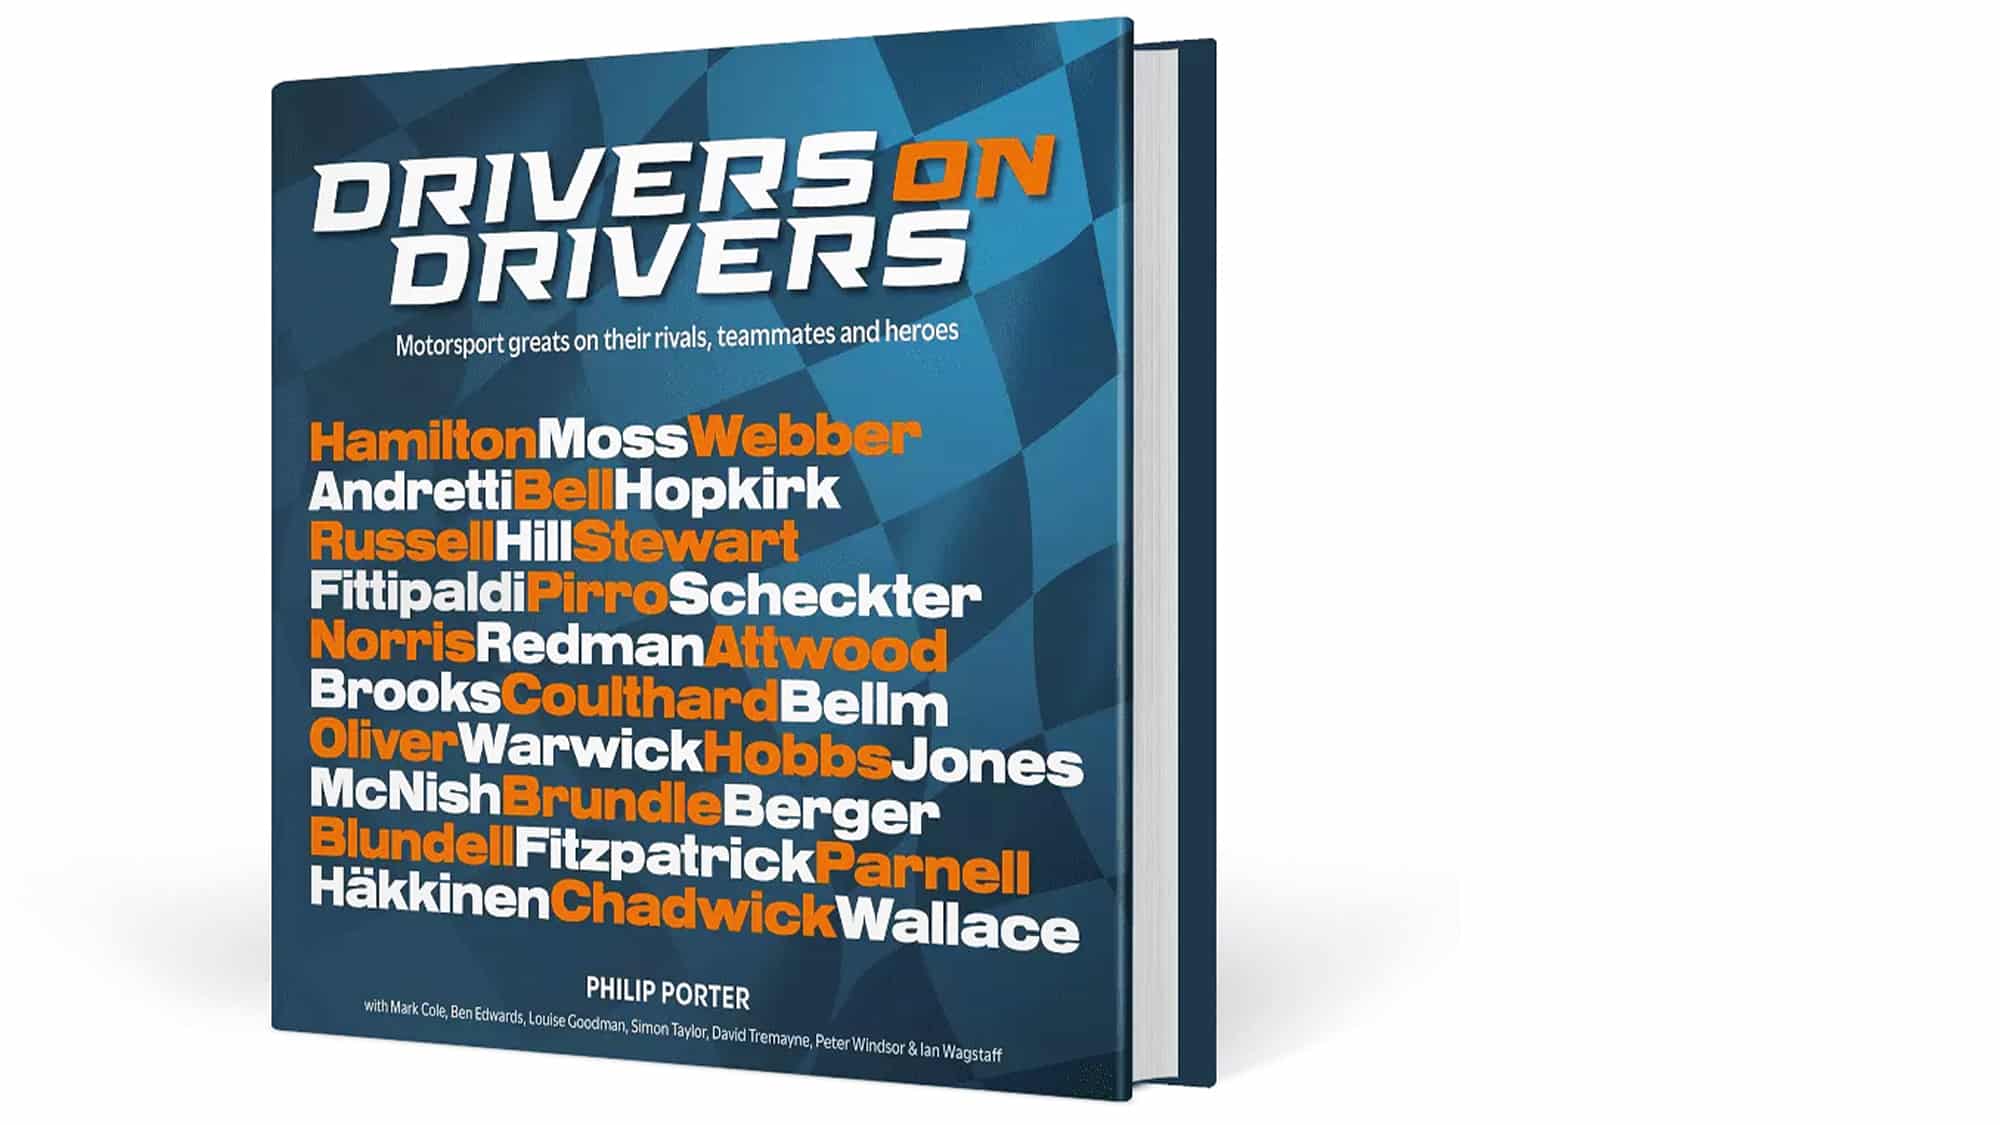 Drivers on Drivers book